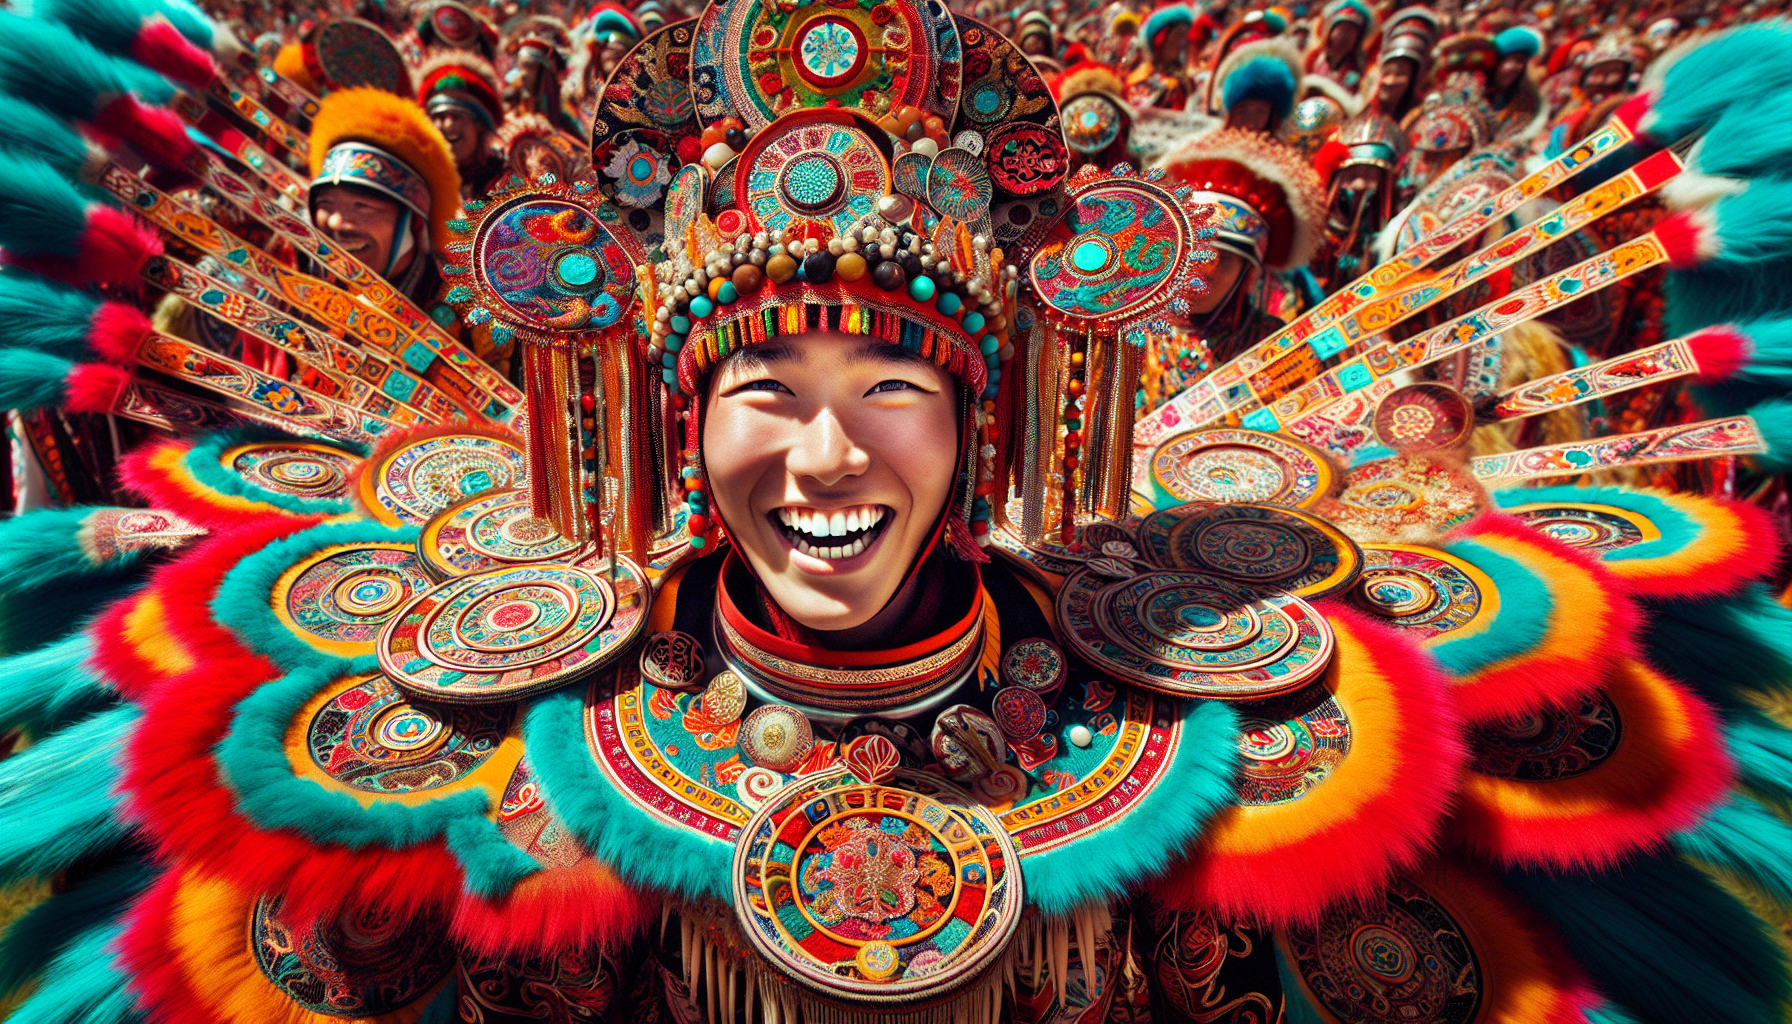 Colorful traditional costumes at the Naadam Festival